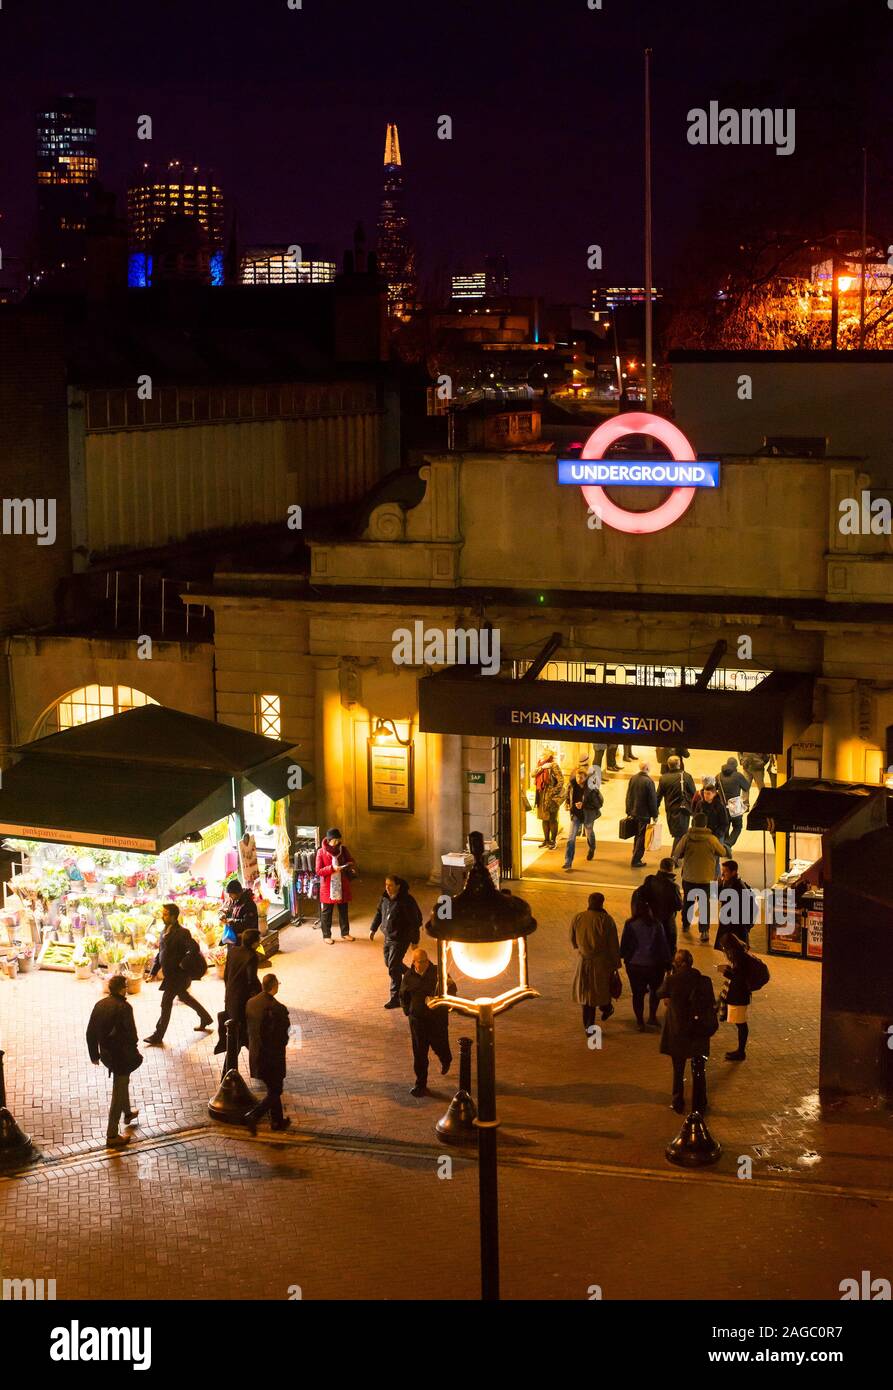 The entrance to Embankment Underground station, Villiers Street, London at night Stock Photo